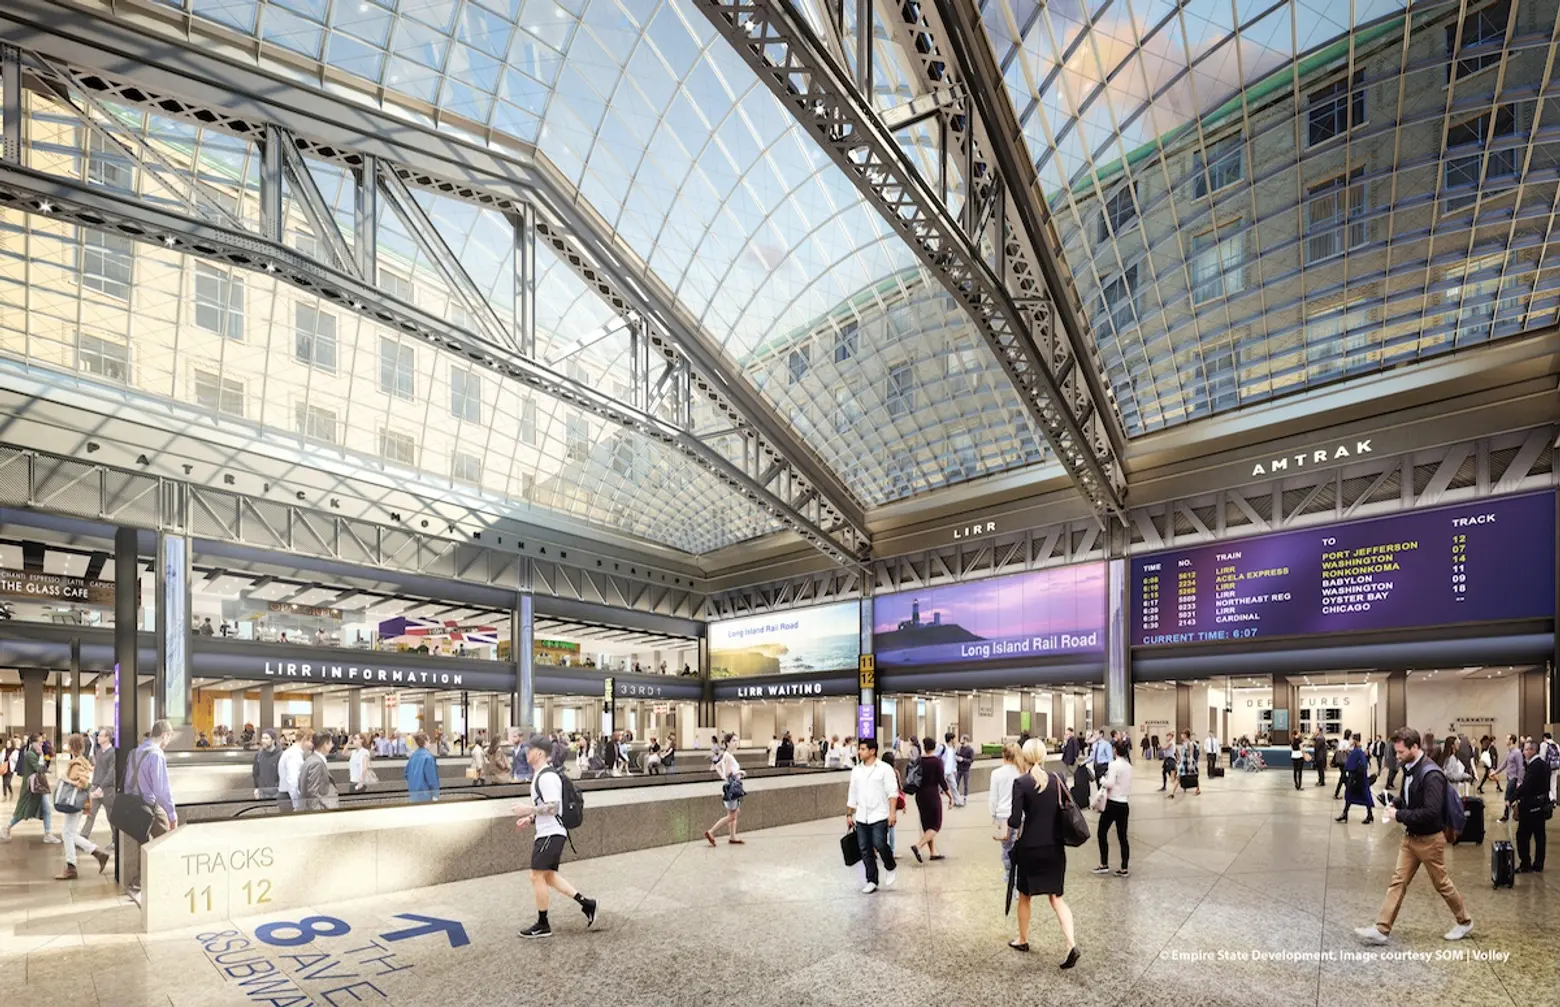 Port Authority Approves $3.5 Billion to Replace Bus Terminal - WSJ